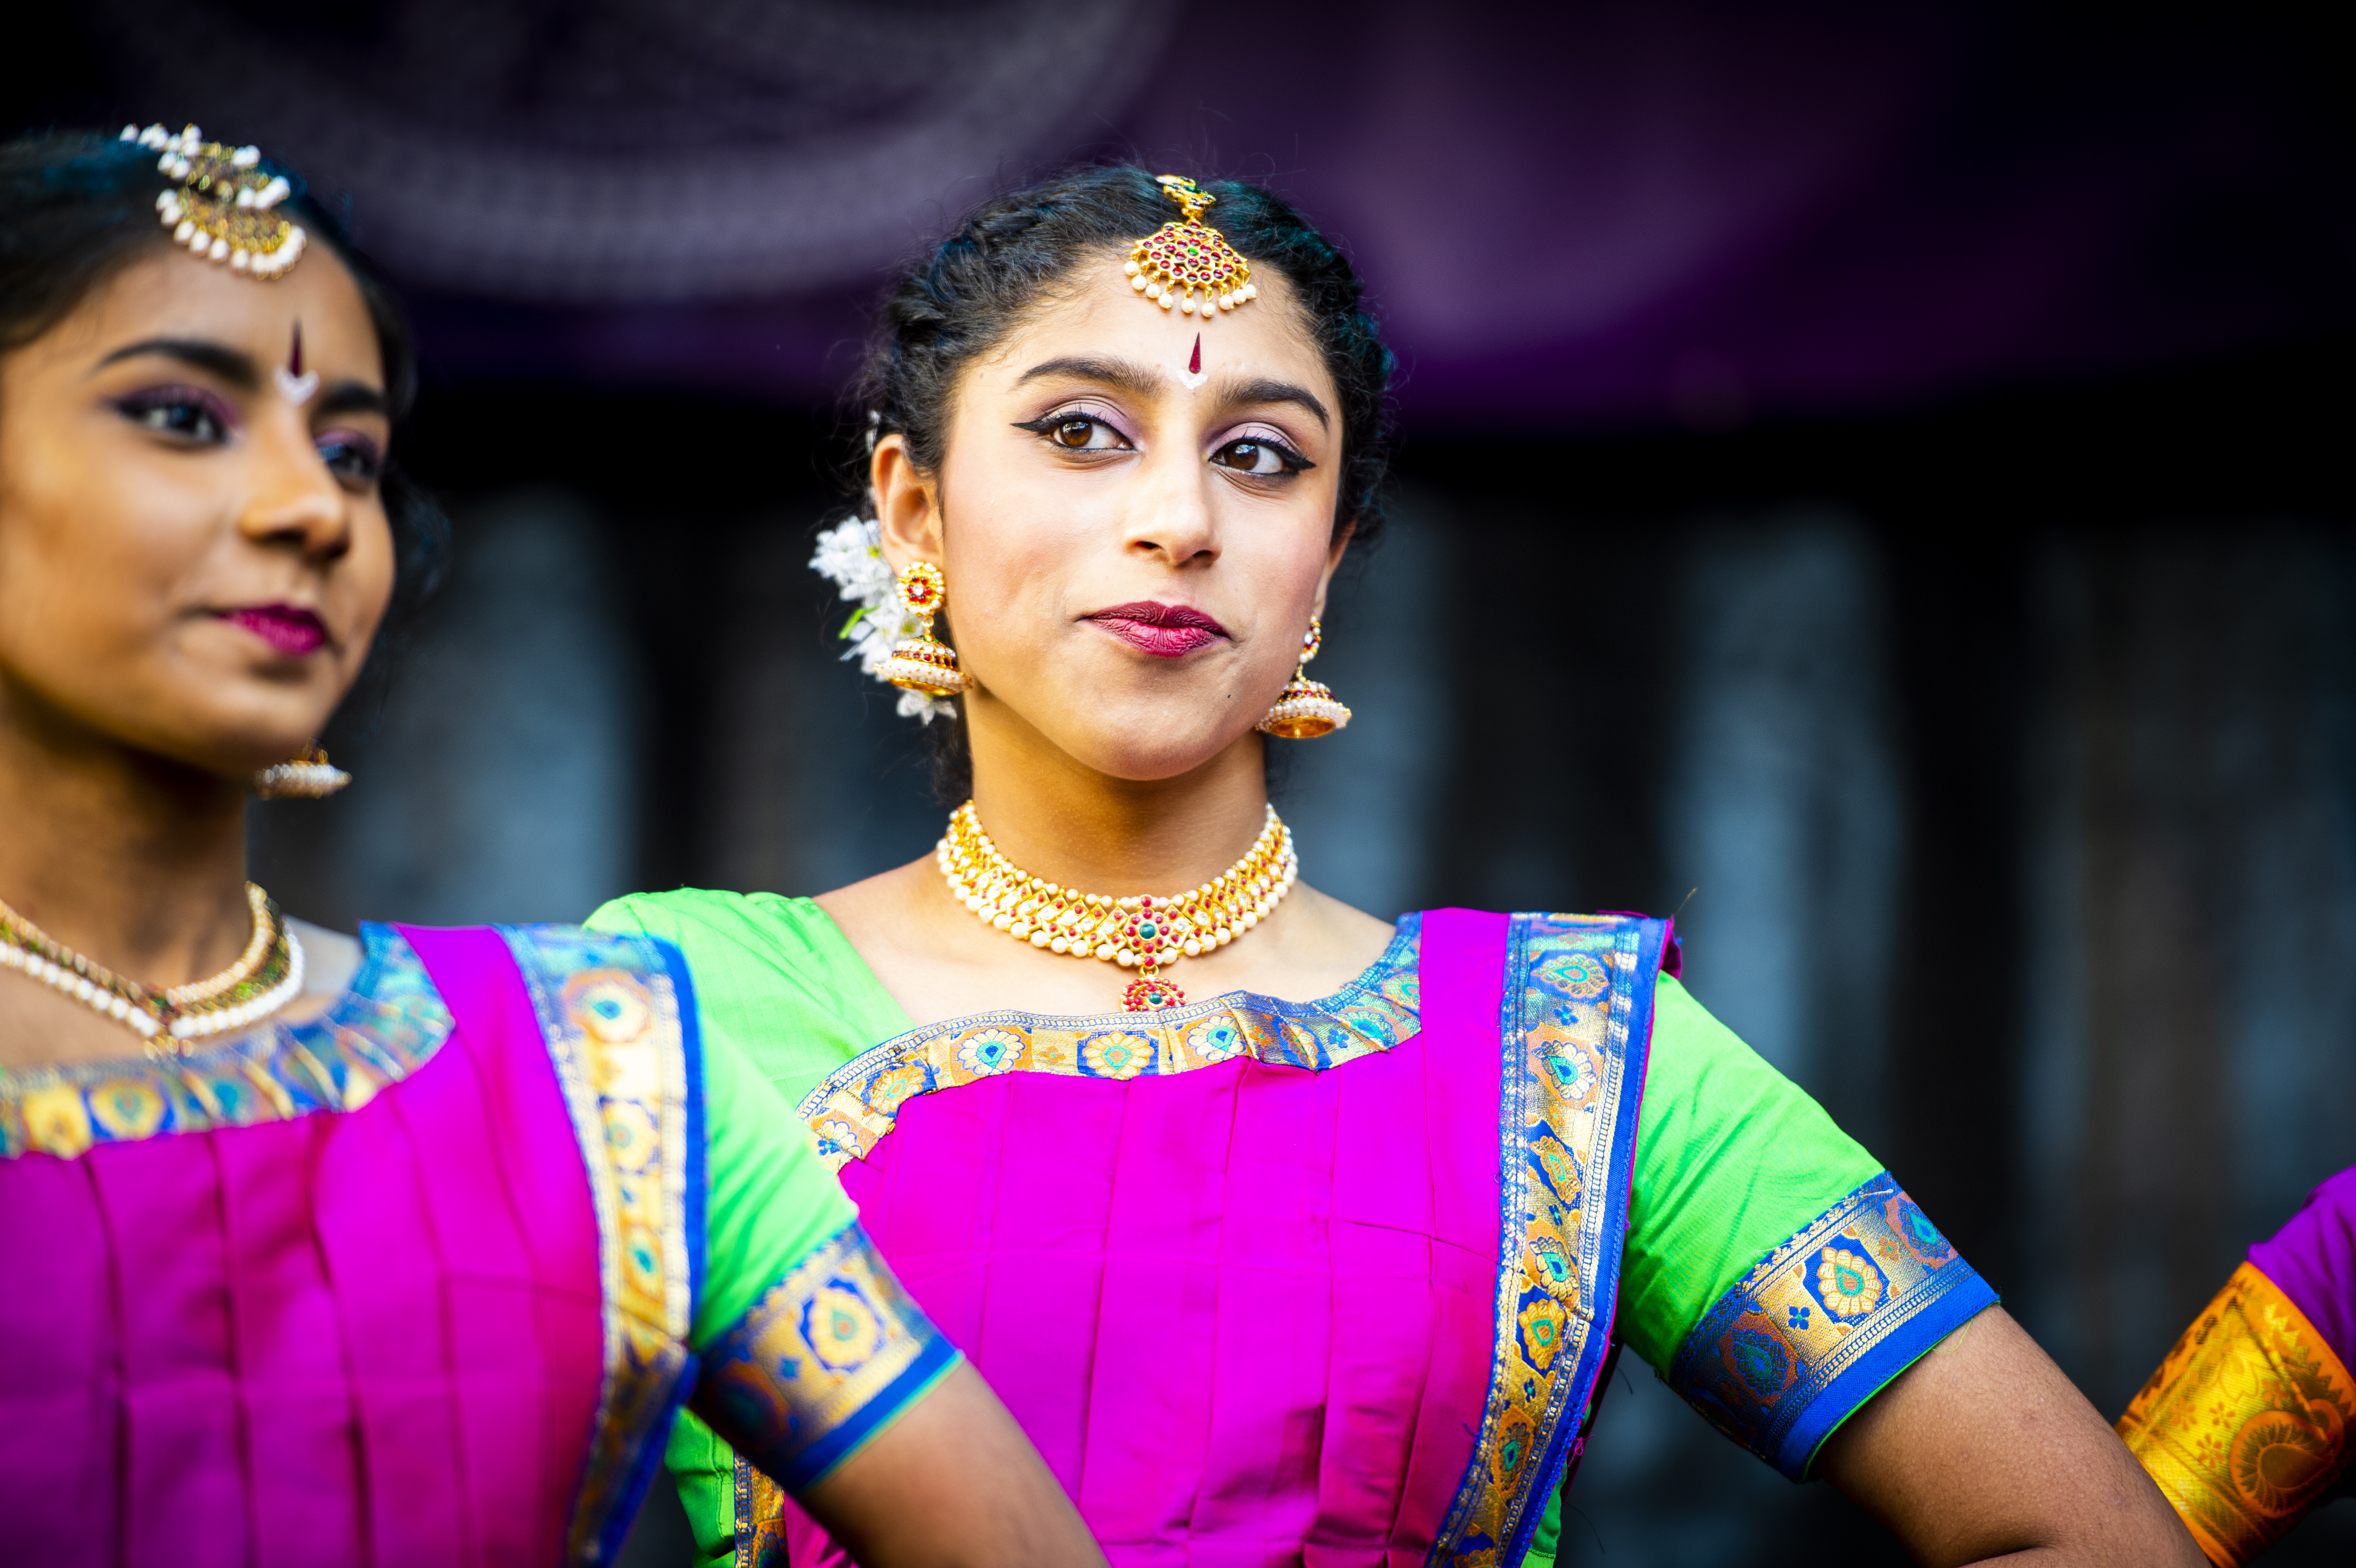 Two female Indian dancers in purple and green trim saris